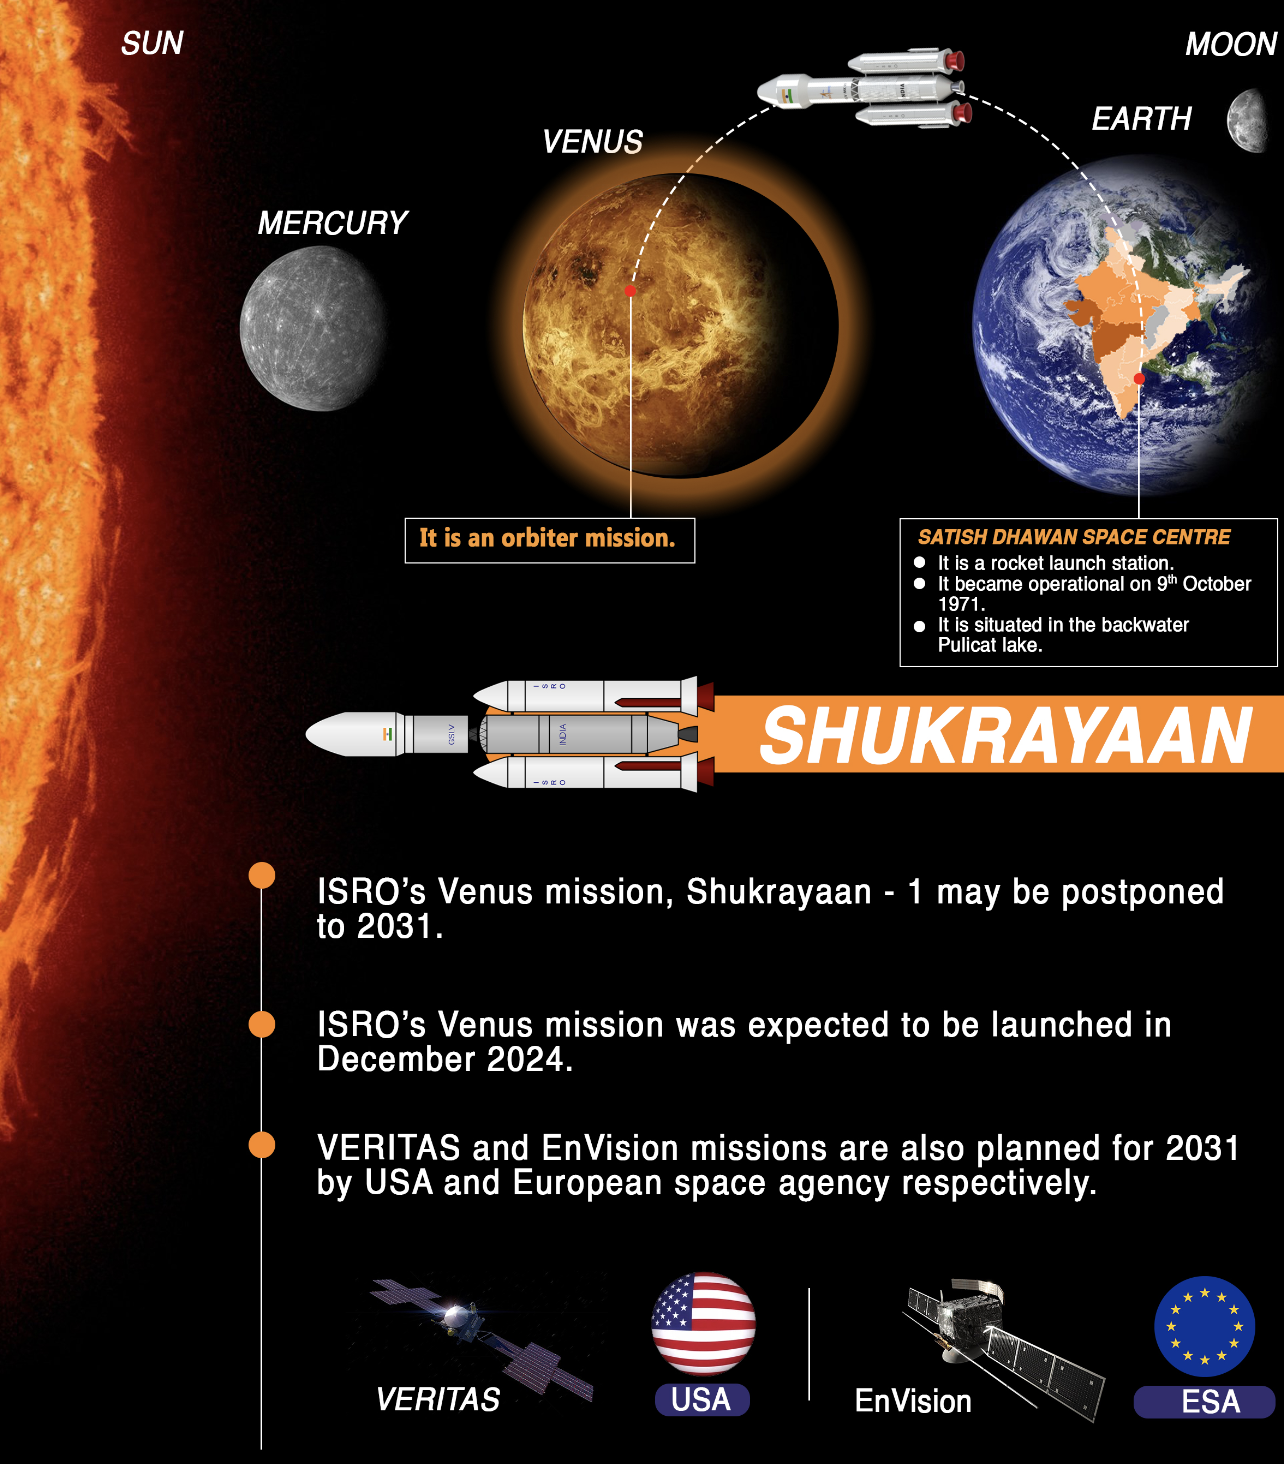  Venus Orbiter Mission| Shukrayaan 1 | ISRO's first planned mission to the planet Venus | UPSC | Science and Technology Current affairs